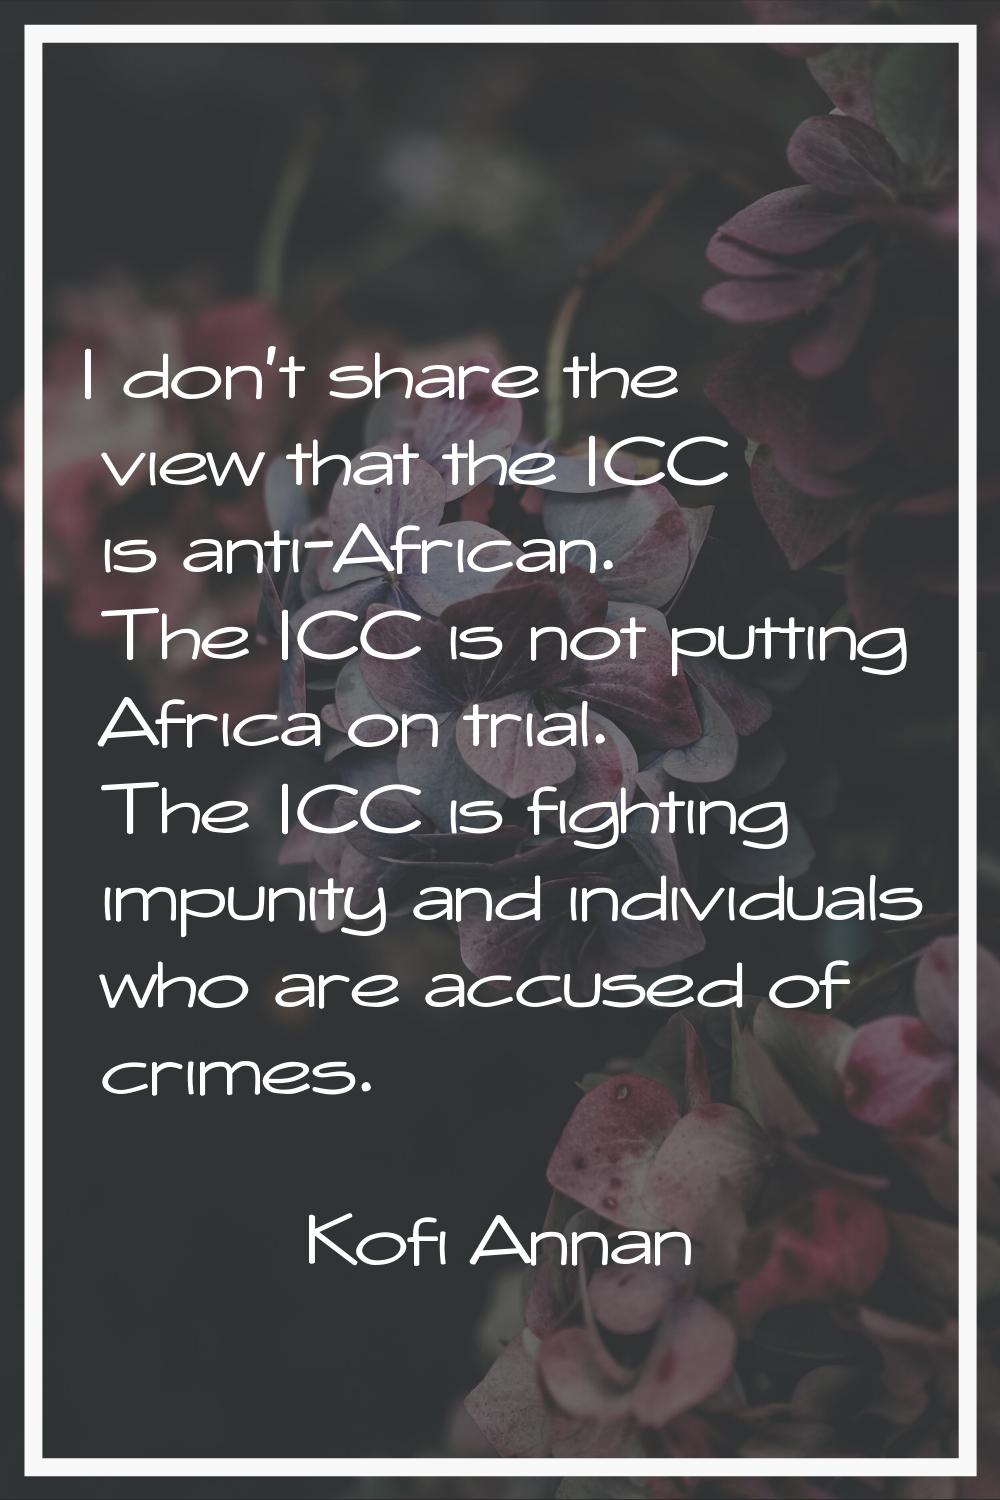 I don't share the view that the ICC is anti-African. The ICC is not putting Africa on trial. The IC